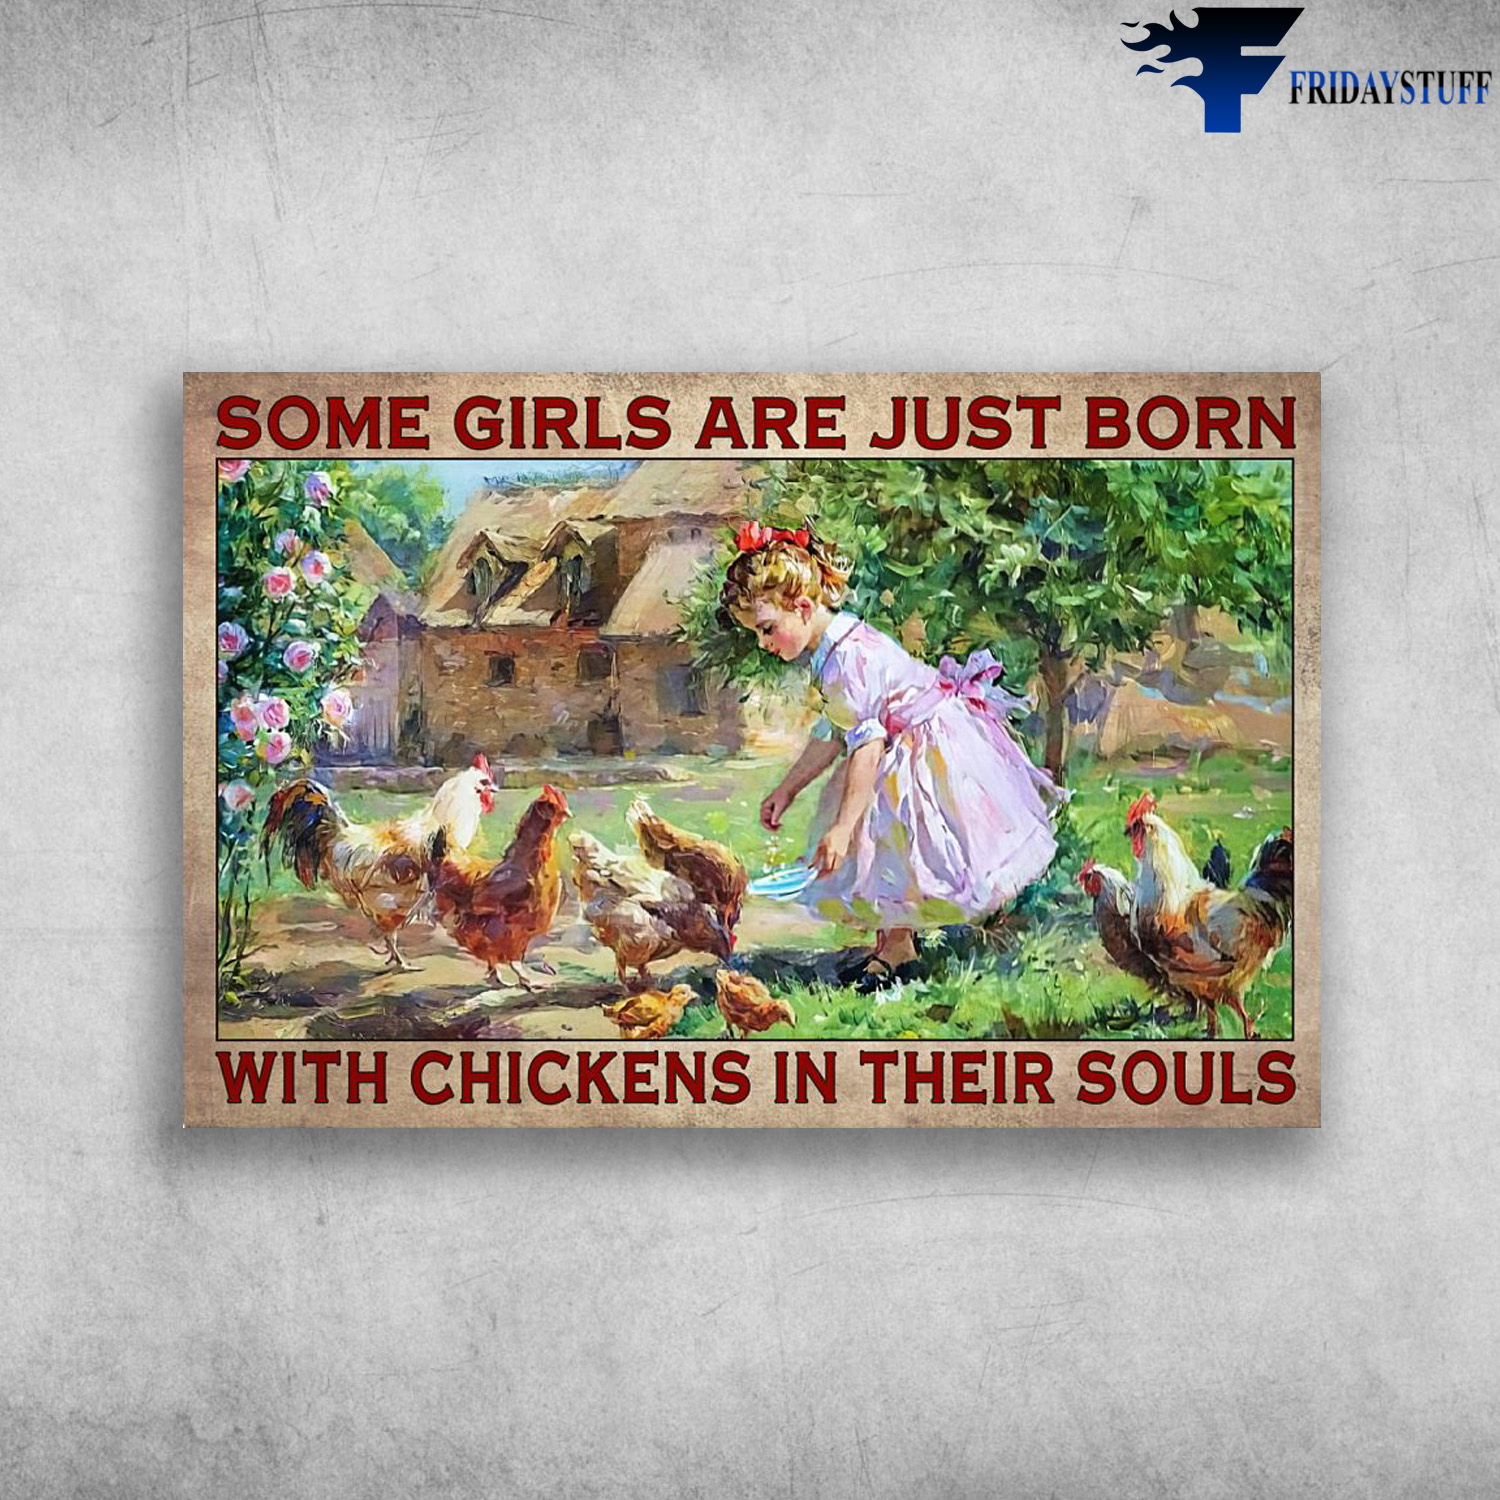 Little Girl Loves Chickens - Some Girls Are Just Born, With Chickens In Their Souls